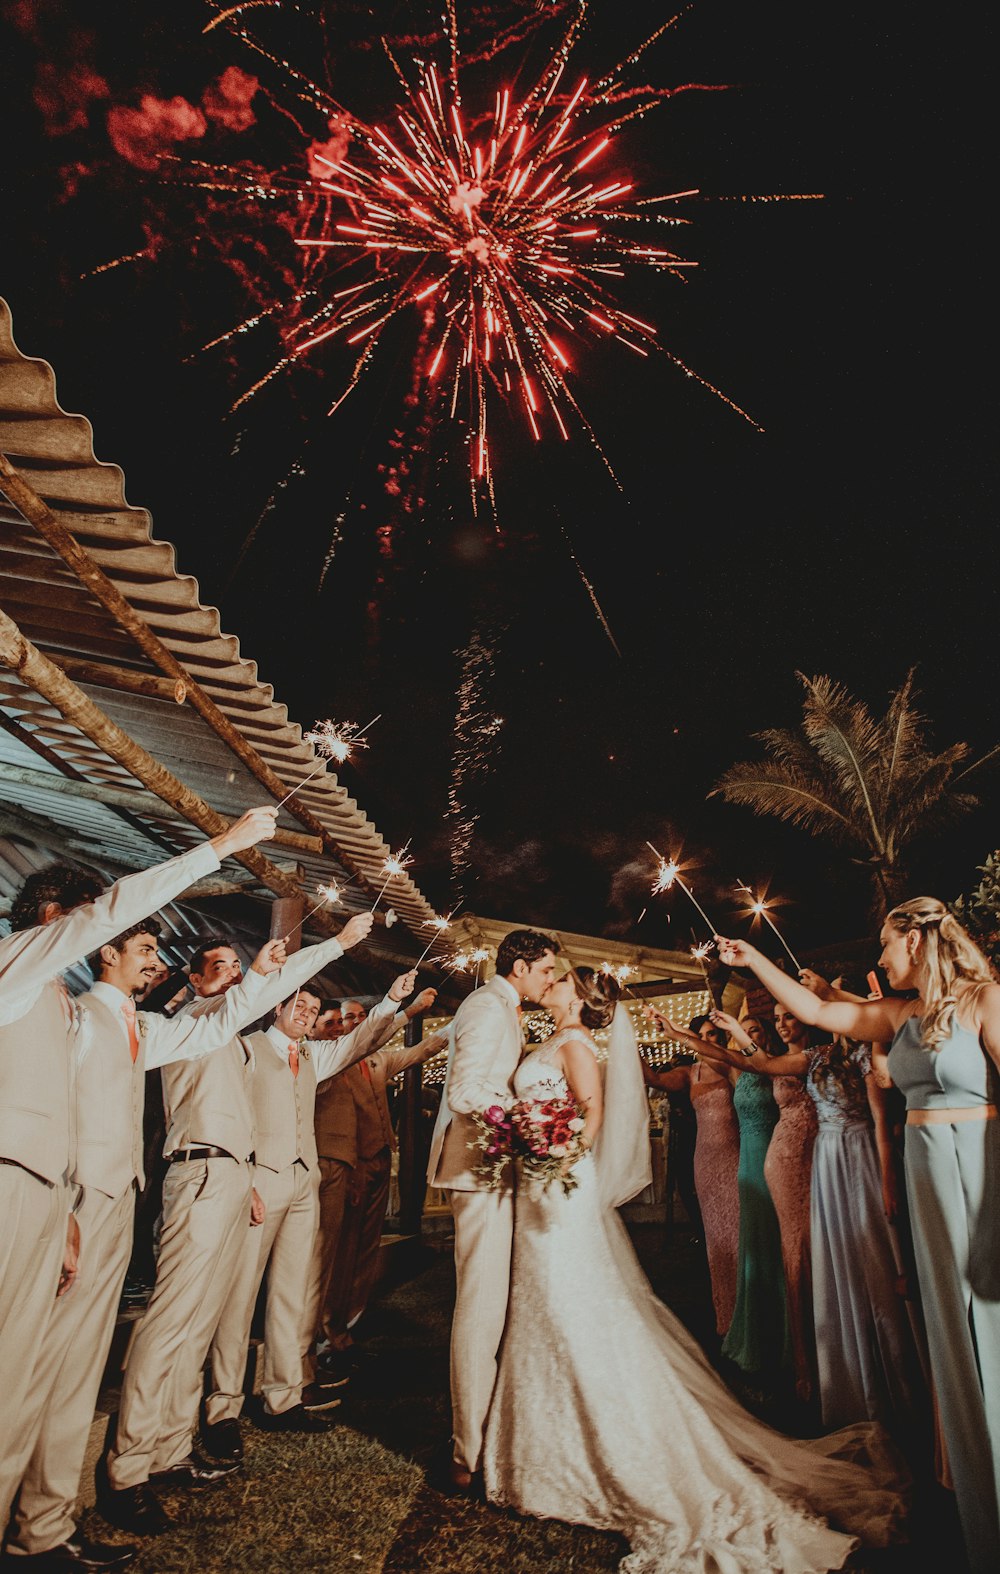 man and woman wedding couple kissing under fireworks